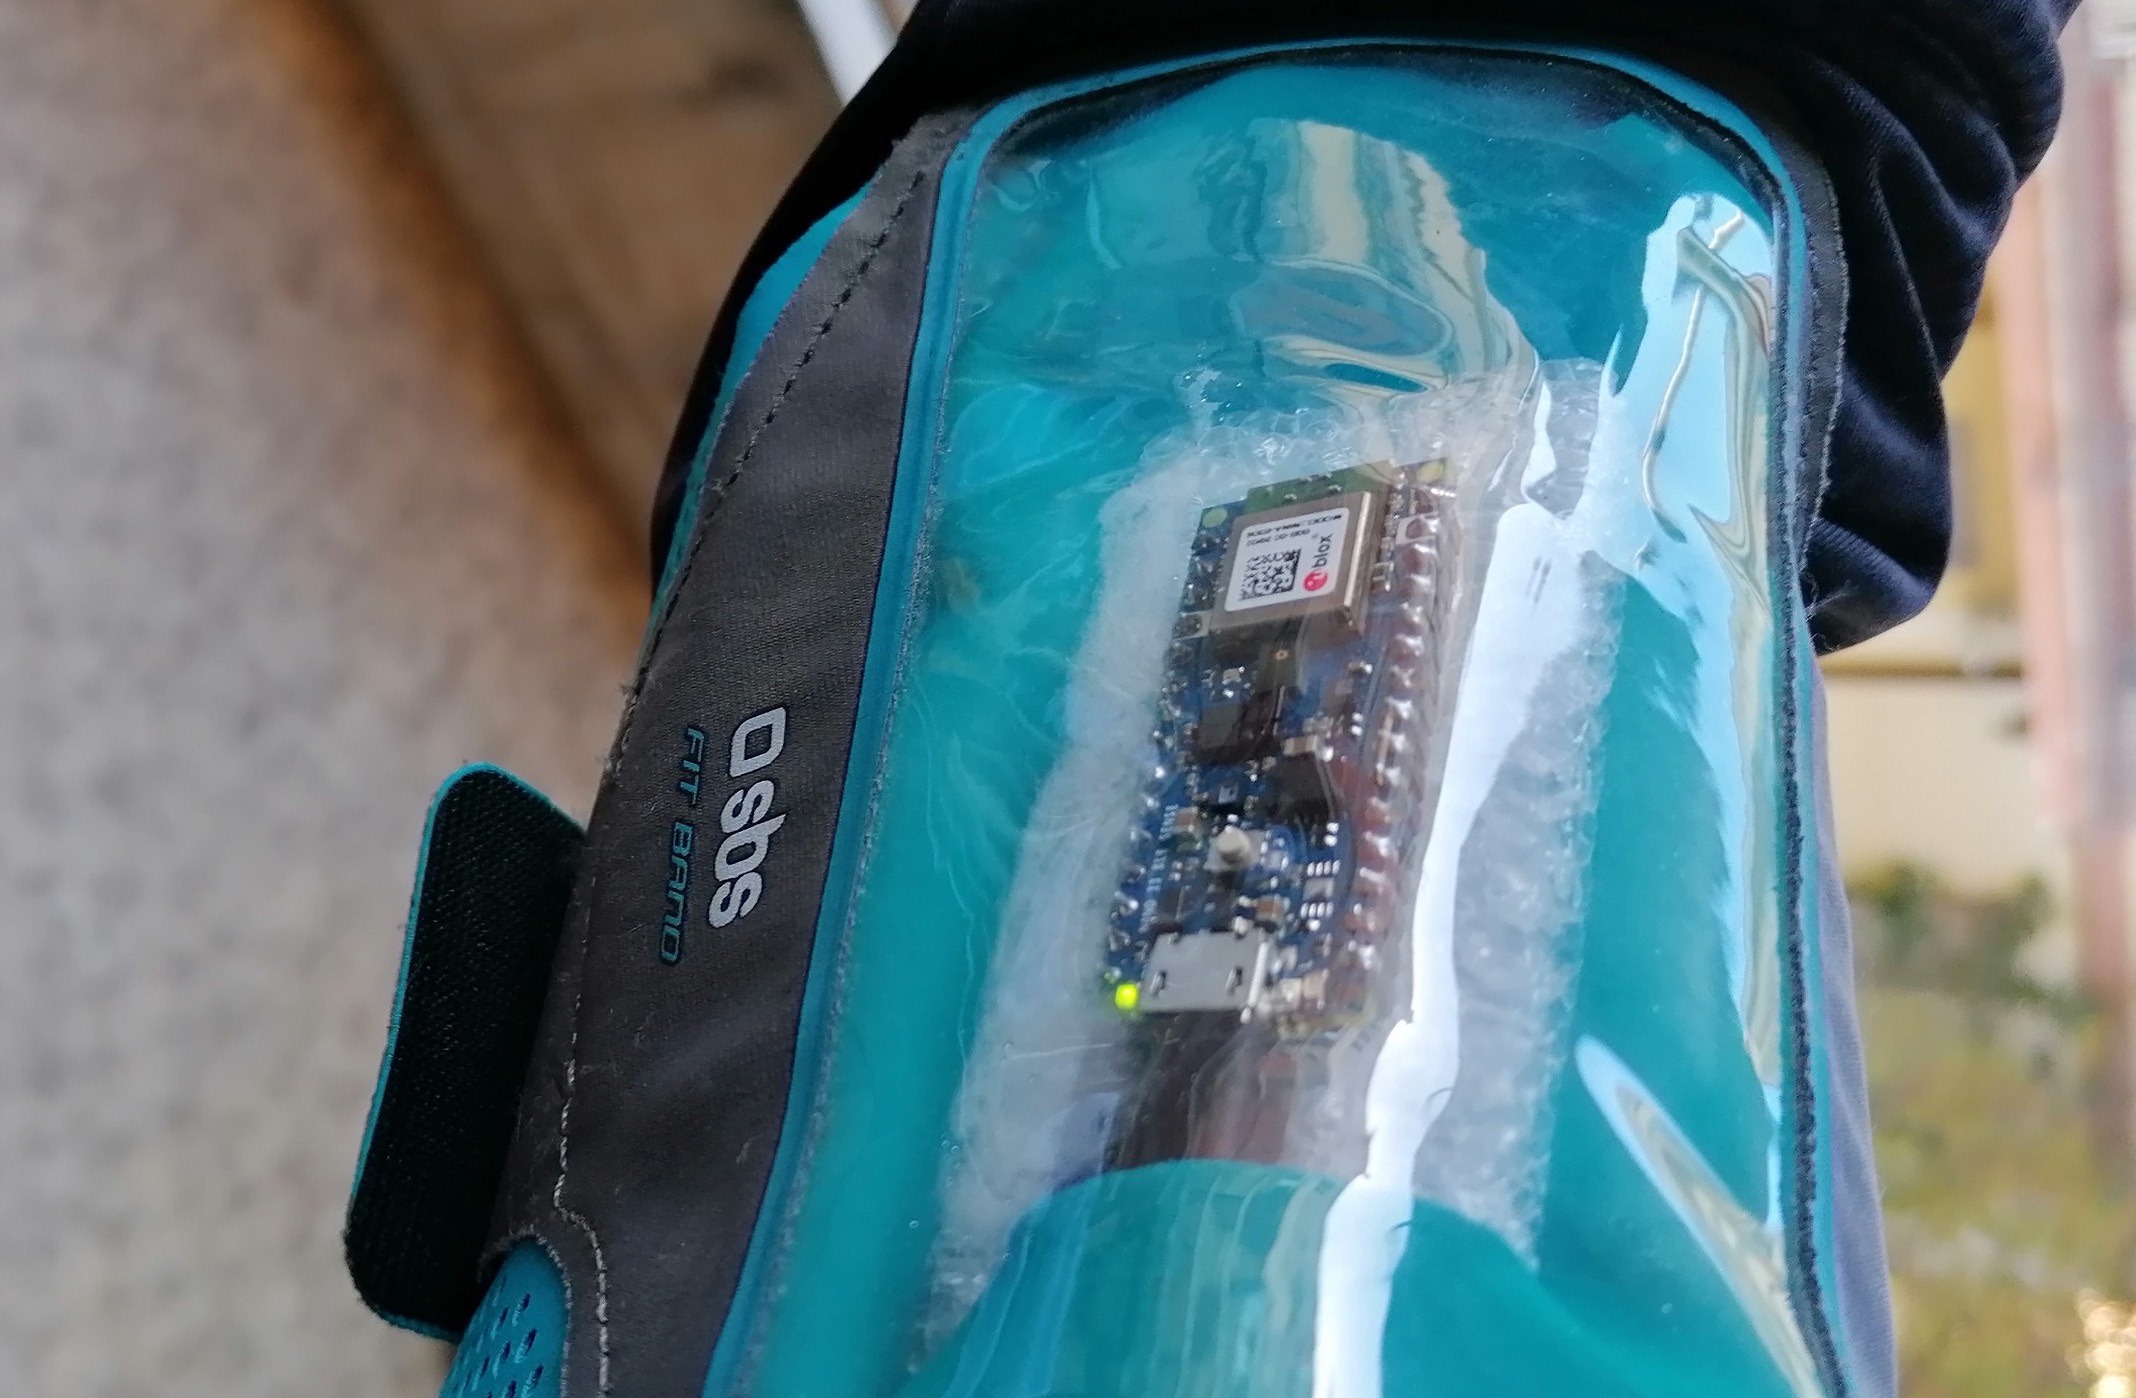 This Arduino device knows how a bike is being ridden using tinyML